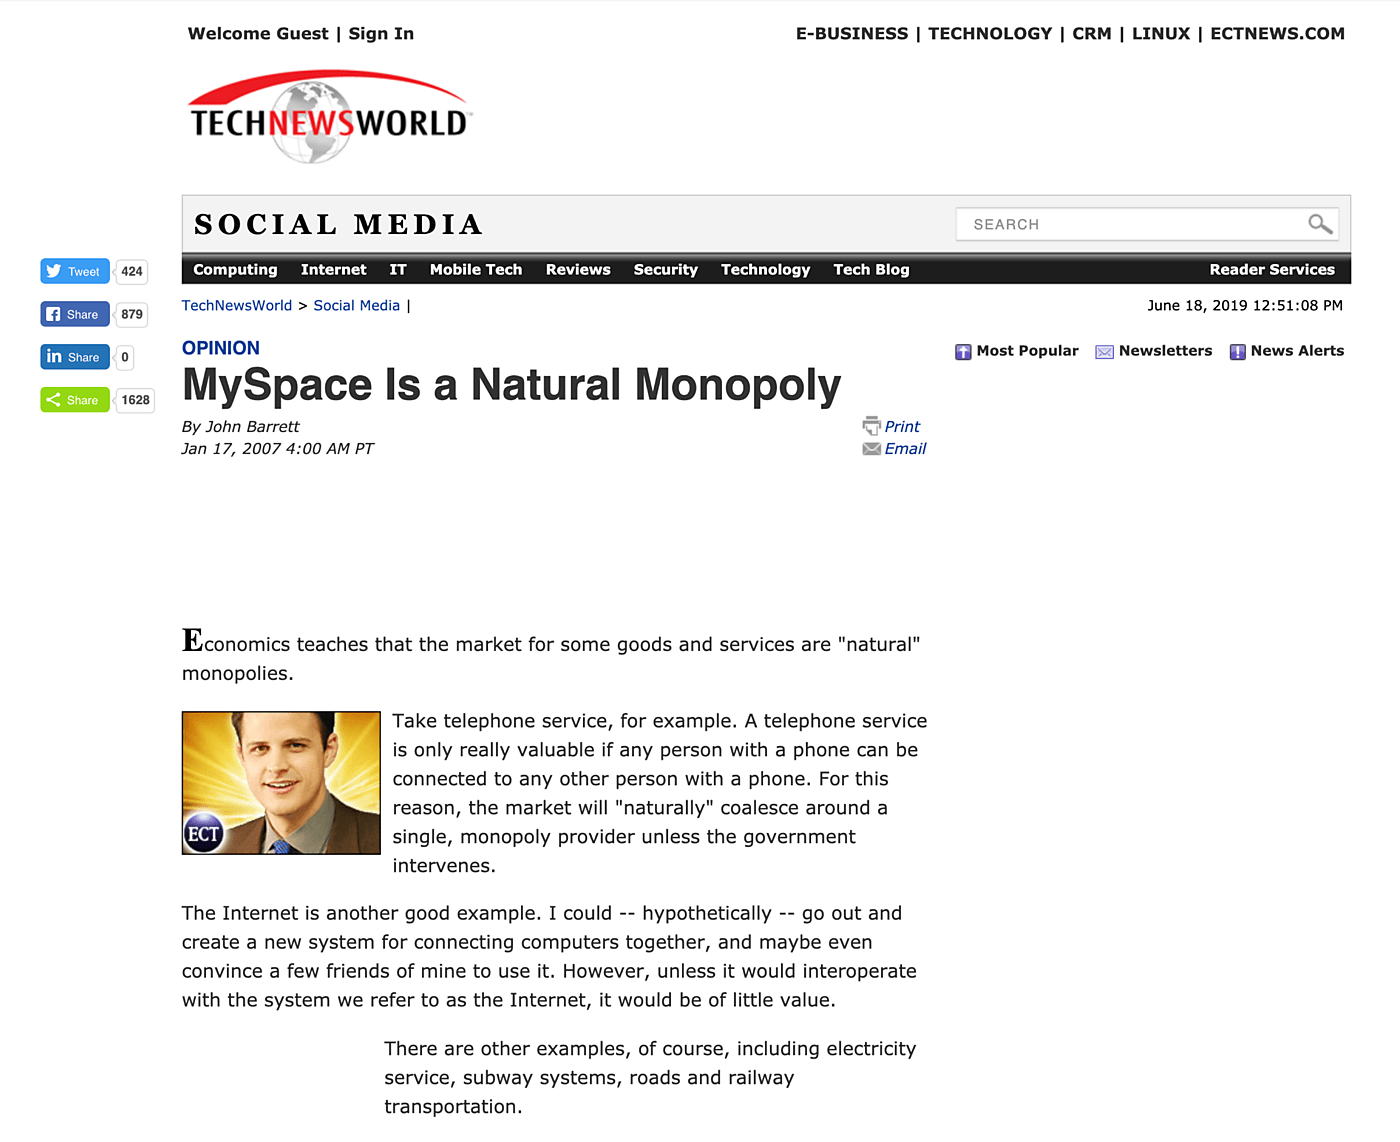 "MySpace is a Natural Monopoly" online news article